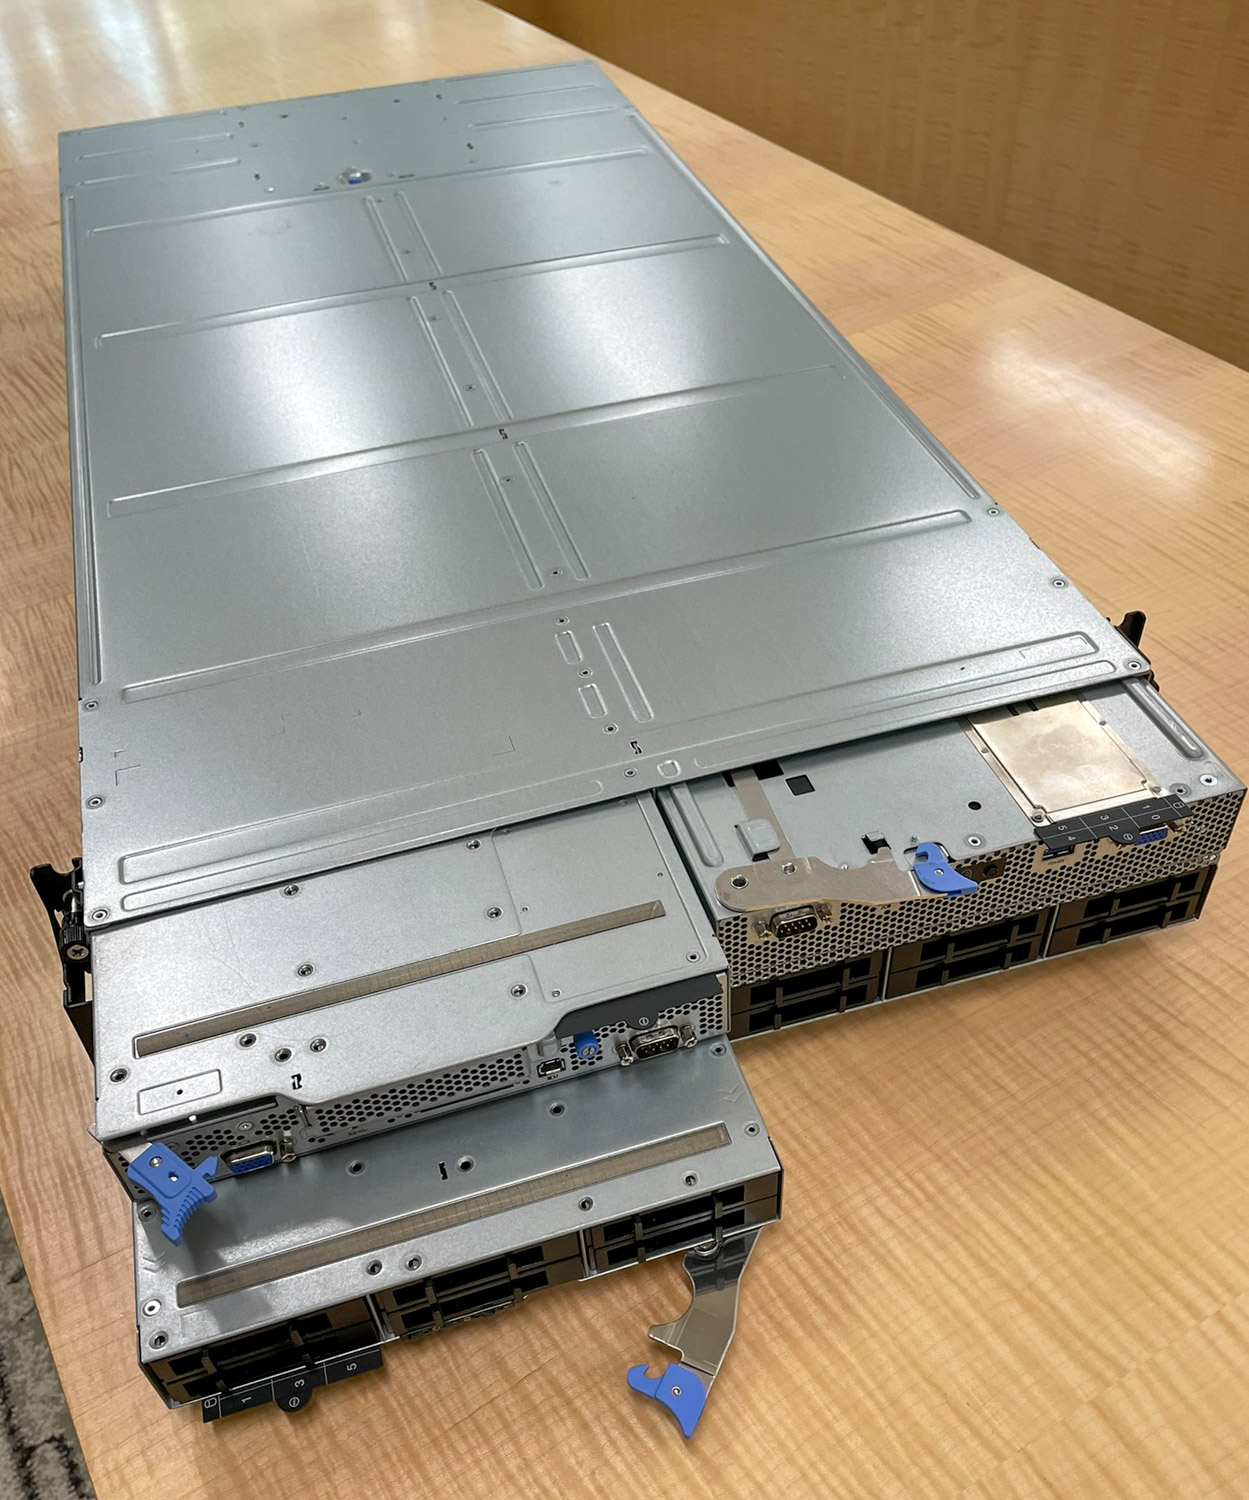 Lenovo ThinkSystem D3 Chassis with multi-node servers pulled out